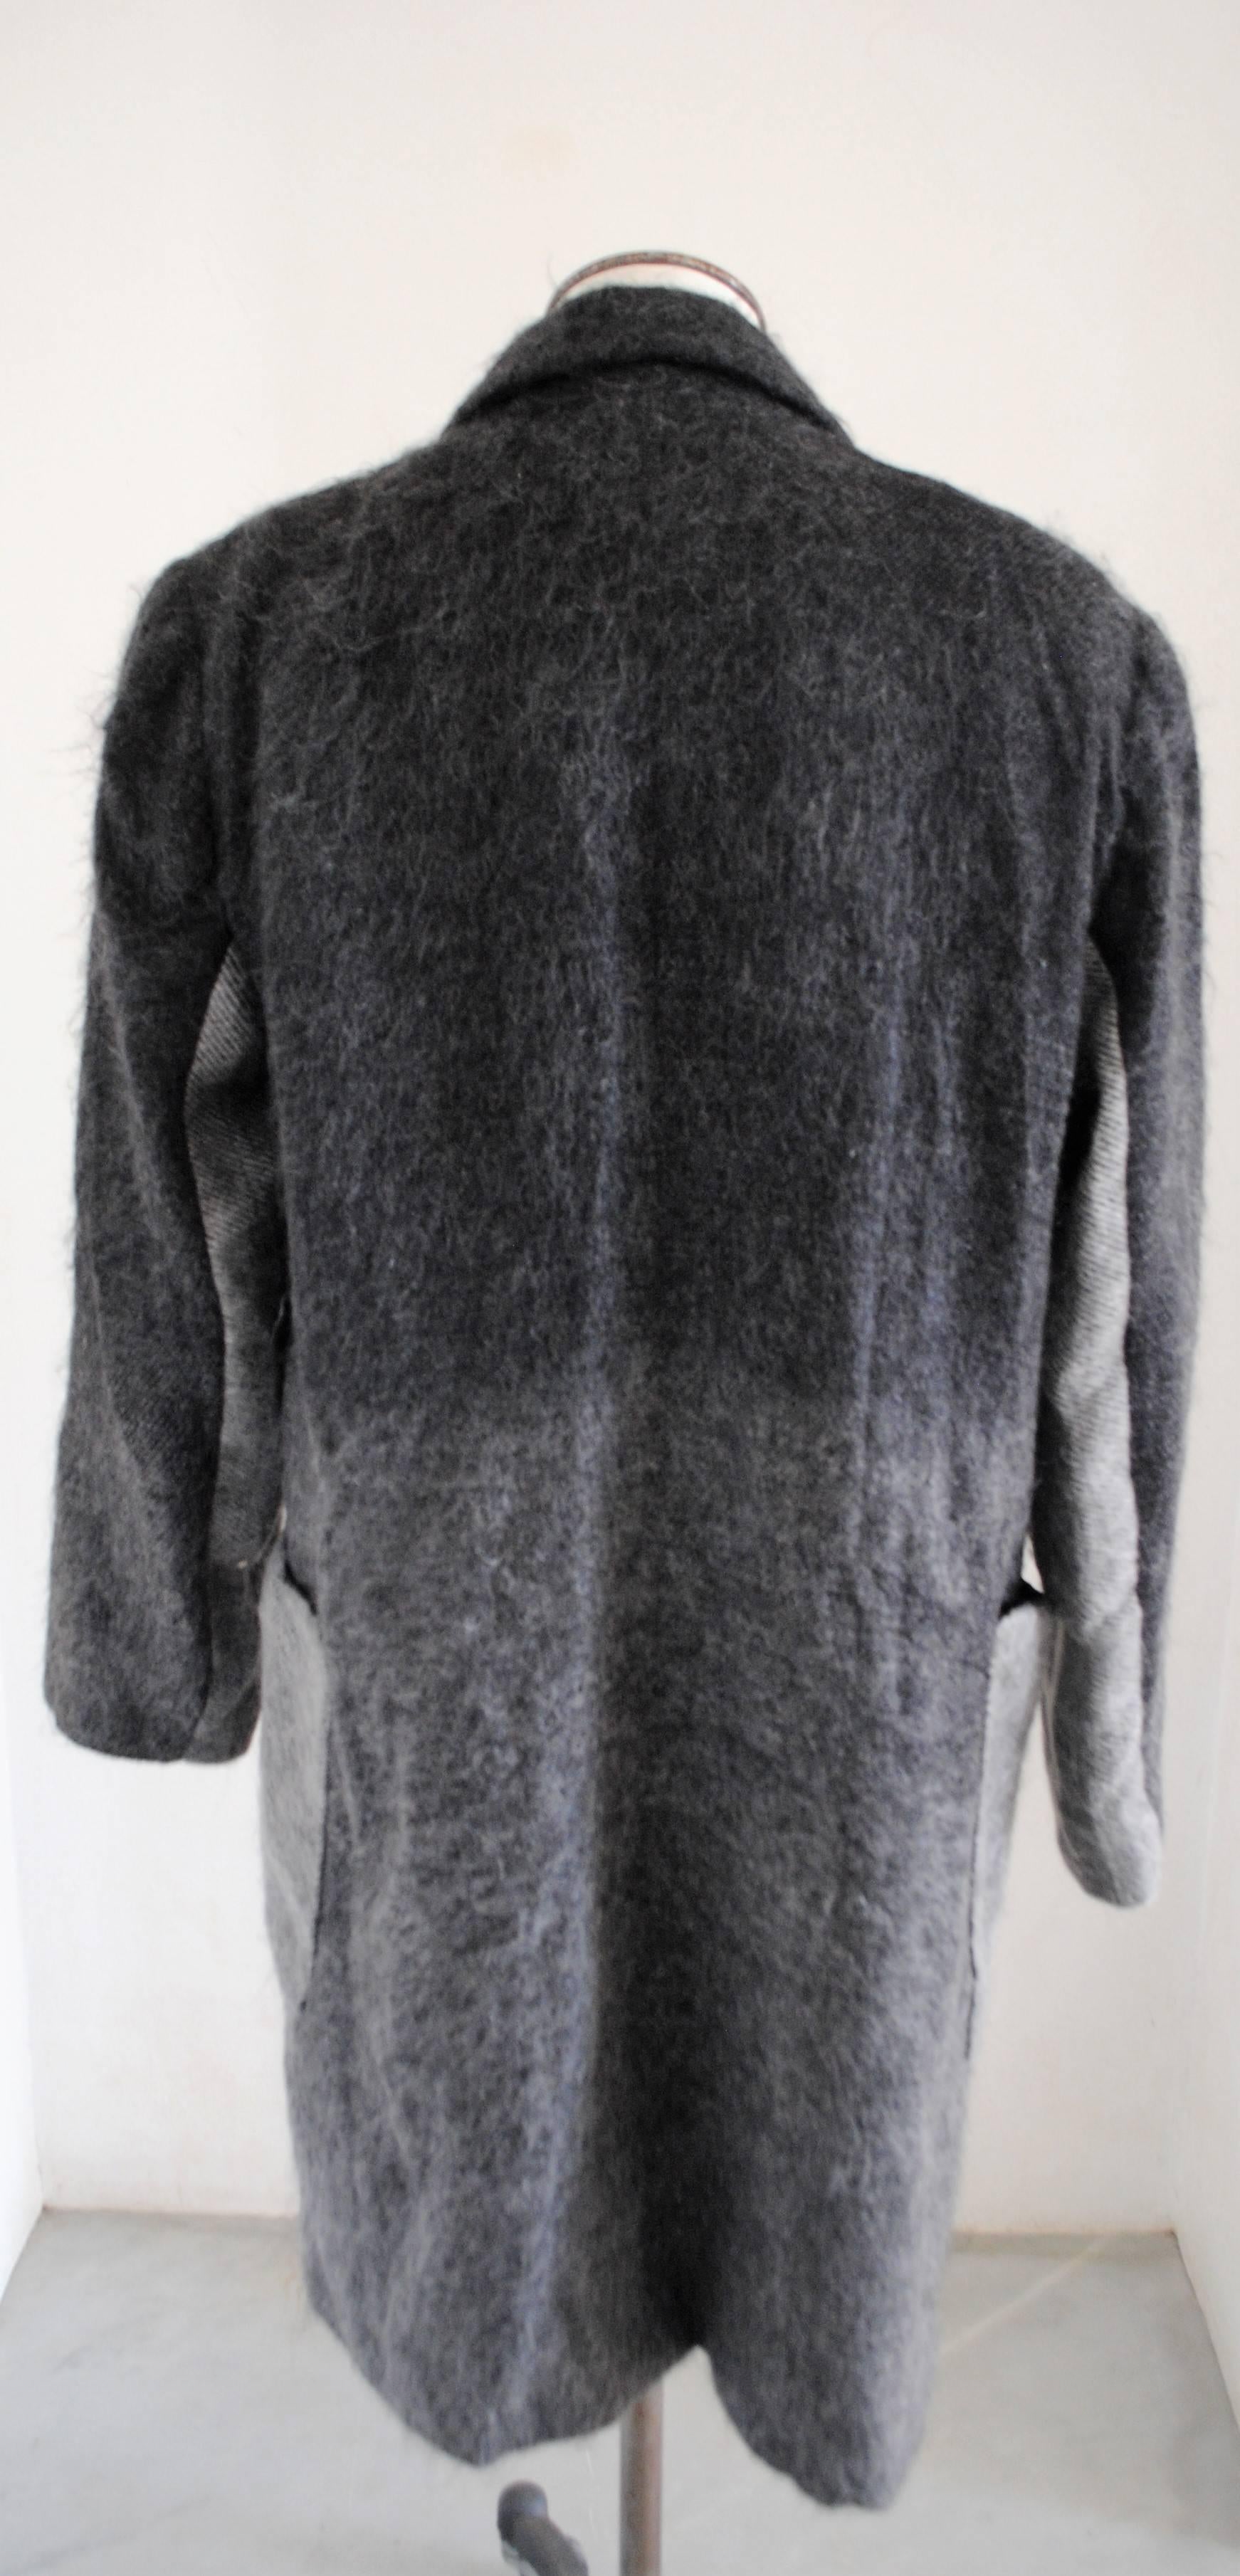 Valentino Grey Wool Jacket
Composition: Wool and mohair
Size: 44